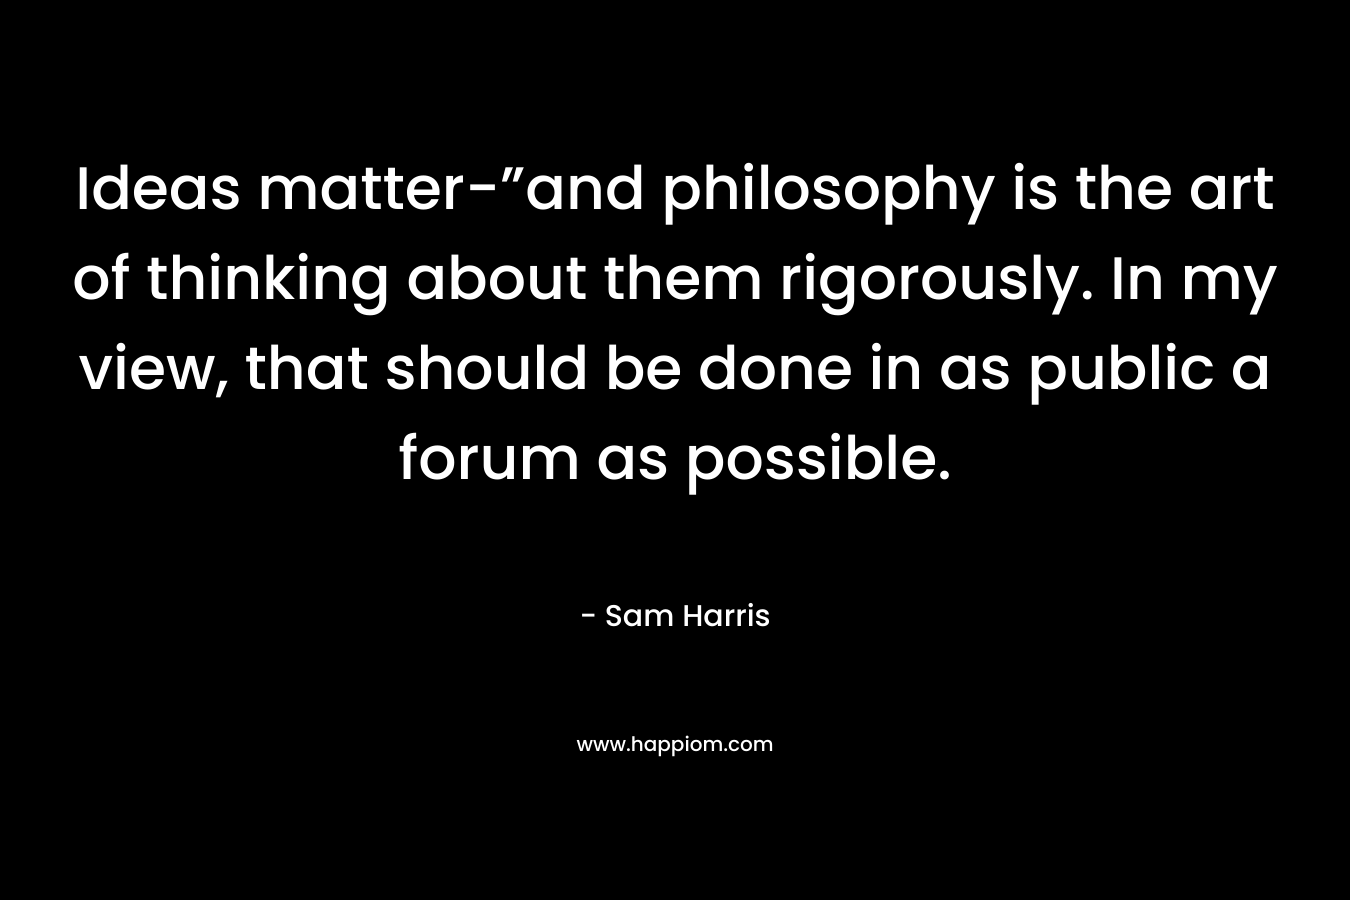 Ideas matter-”and philosophy is the art of thinking about them rigorously. In my view, that should be done in as public a forum as possible. – Sam Harris